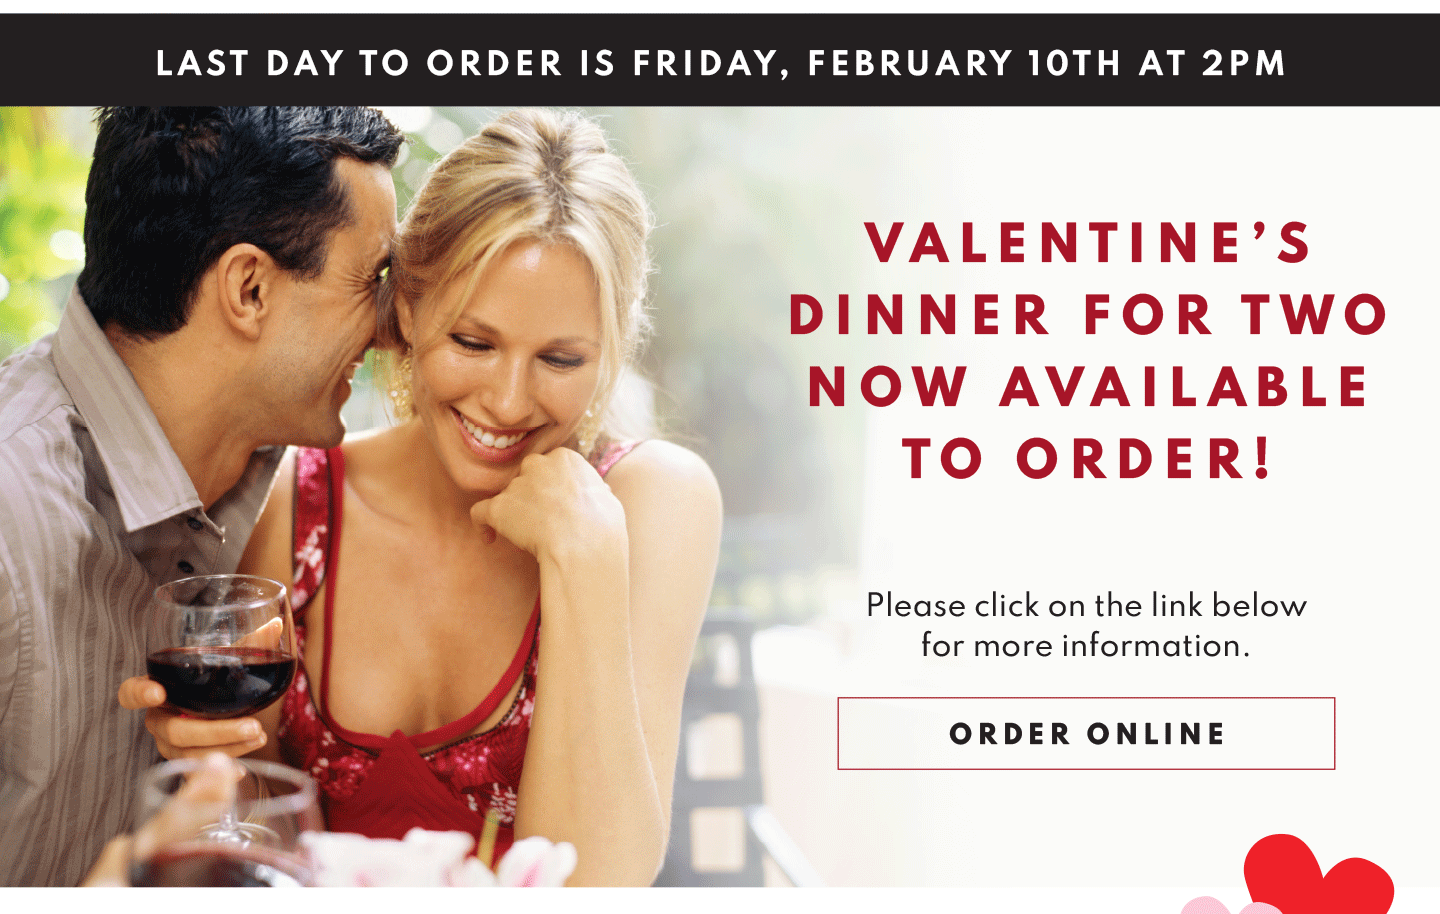 Valentine's Dinner for Two now available to order! Click for more information and to order online. Last day to order is Friday, February 10th at 2pm